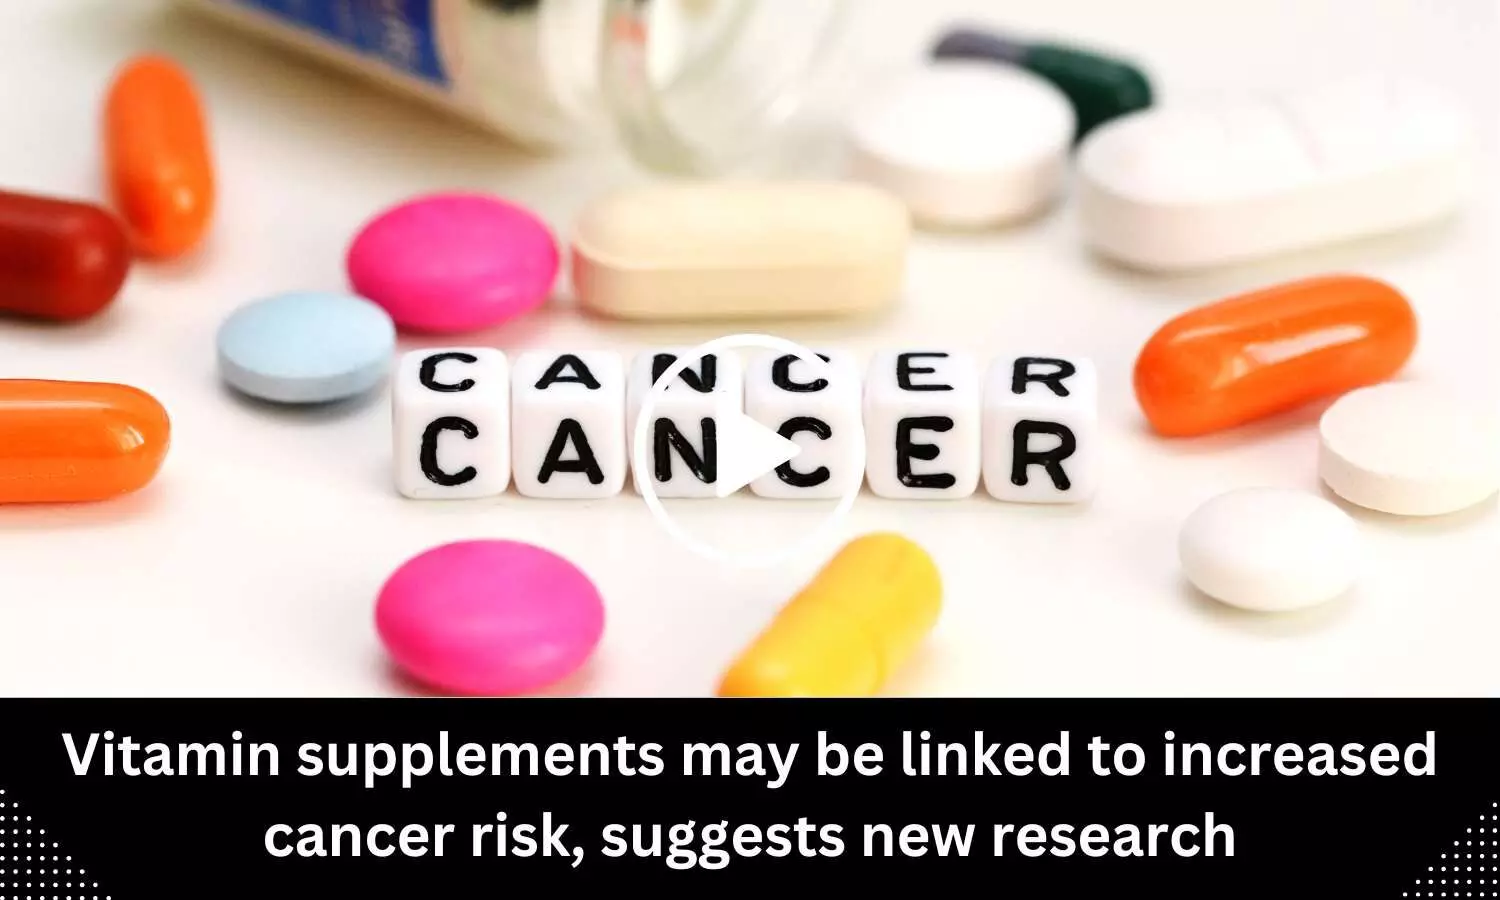 Vitamin supplements may be linked to increased cancer risk, suggests new research